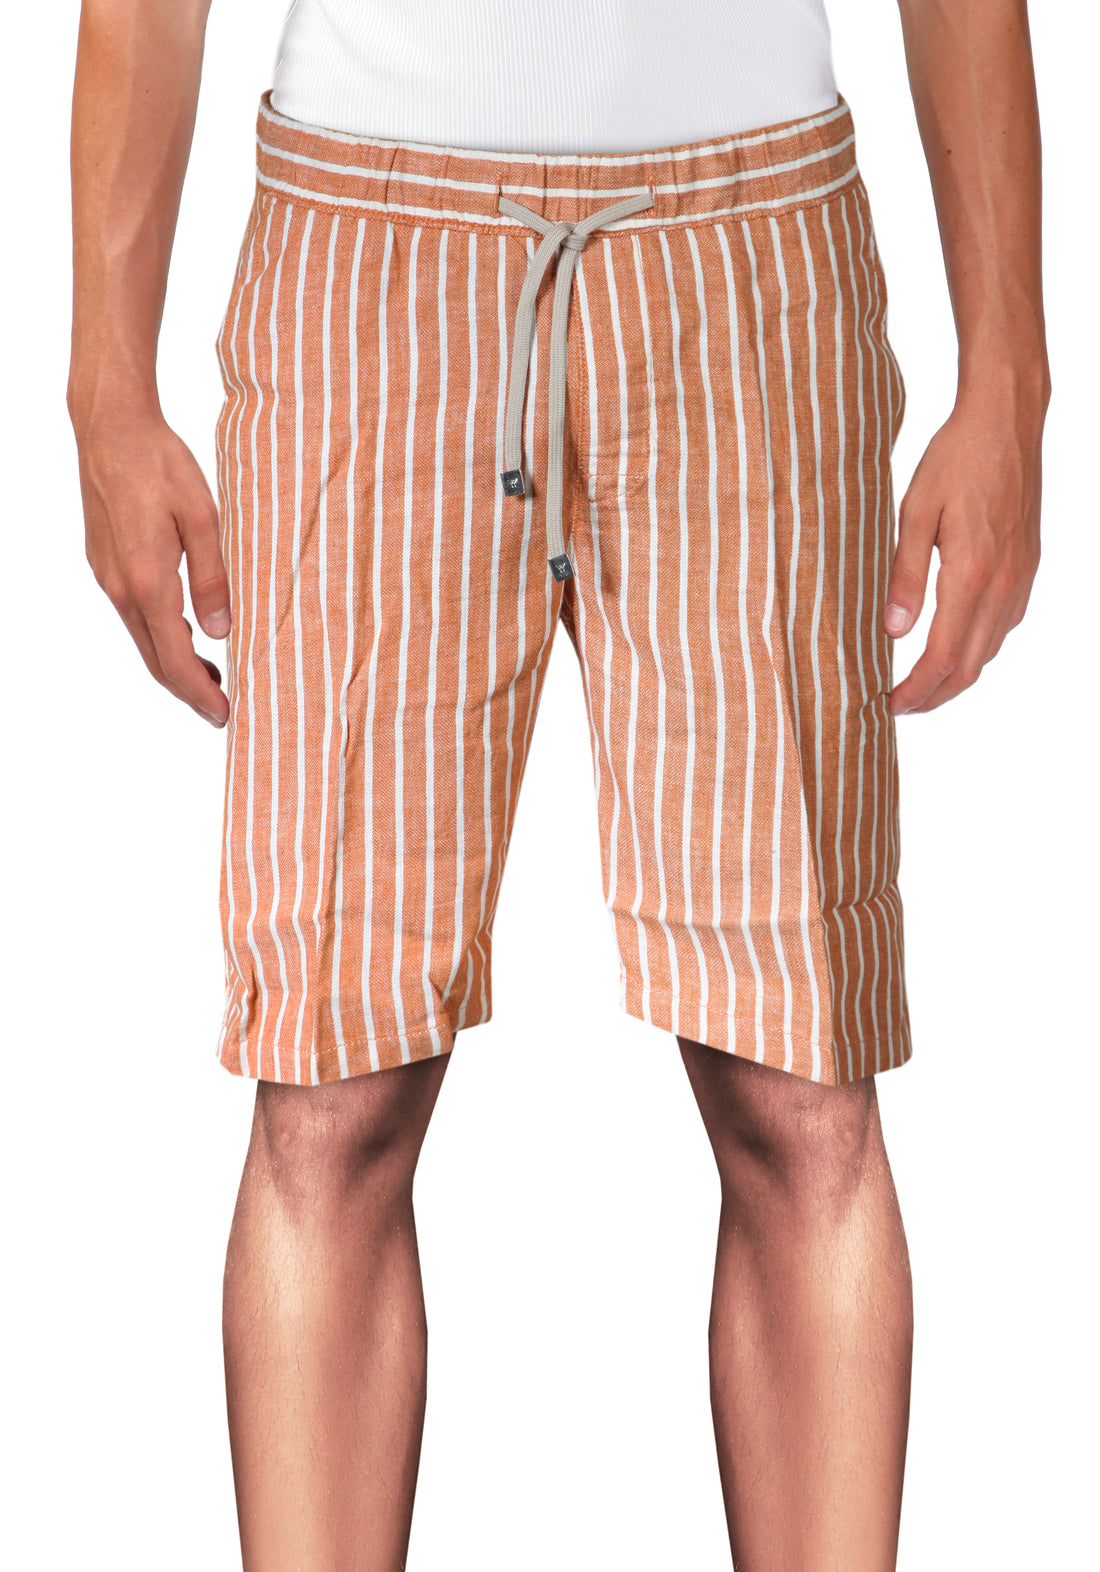 Striped Bermuda shorts with lace in Linen - Orange